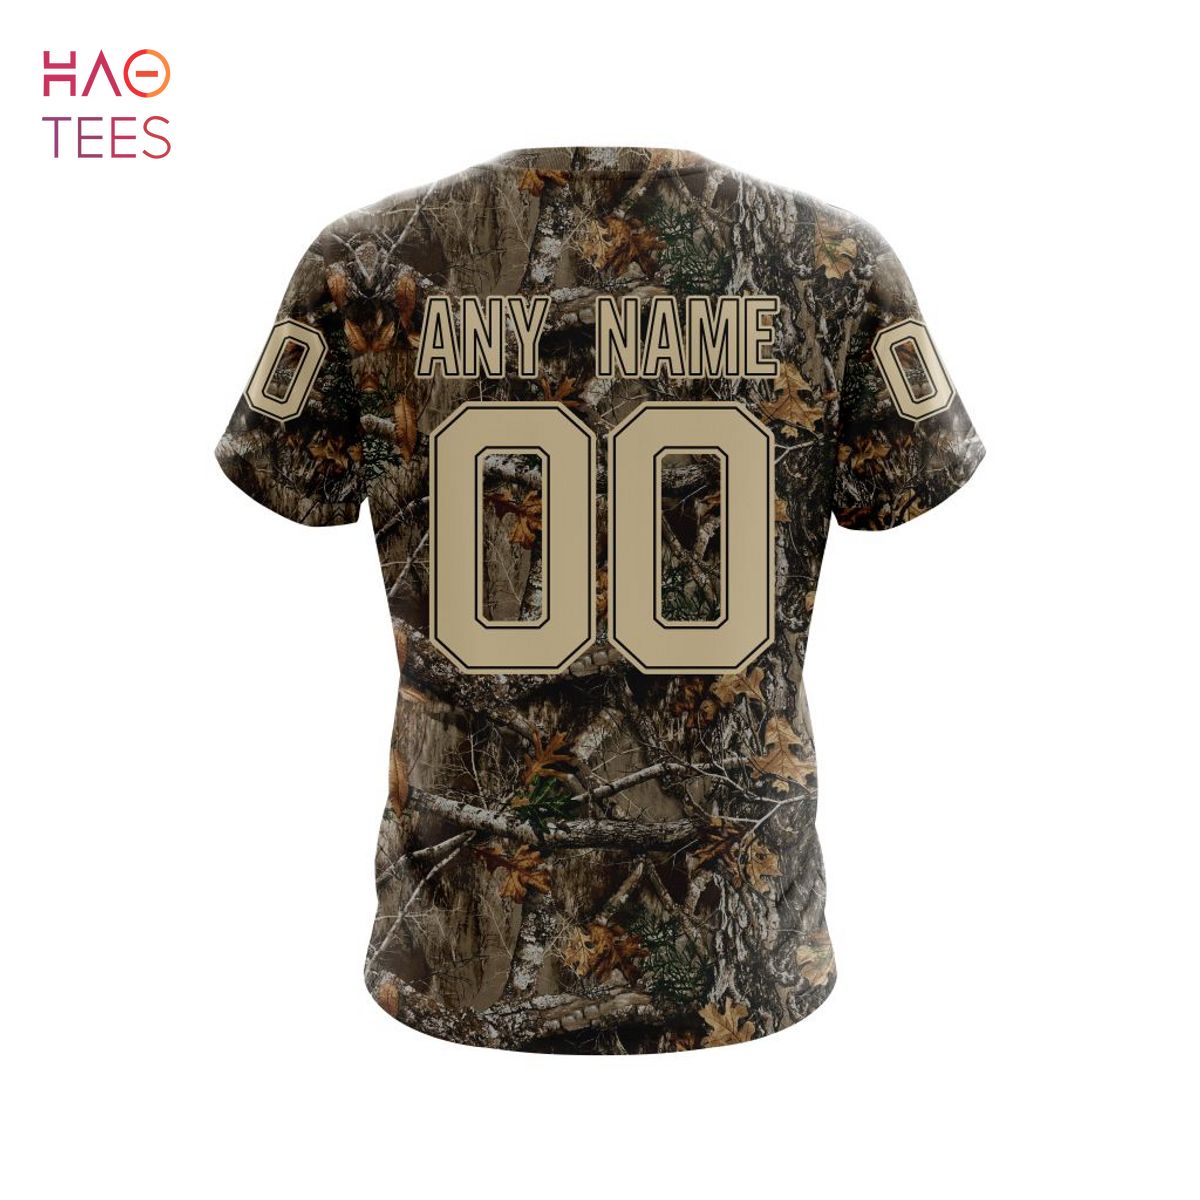 BEST NFL Tennessee Titans, Speicla Camo Realtree Hunting 3D Hoodie